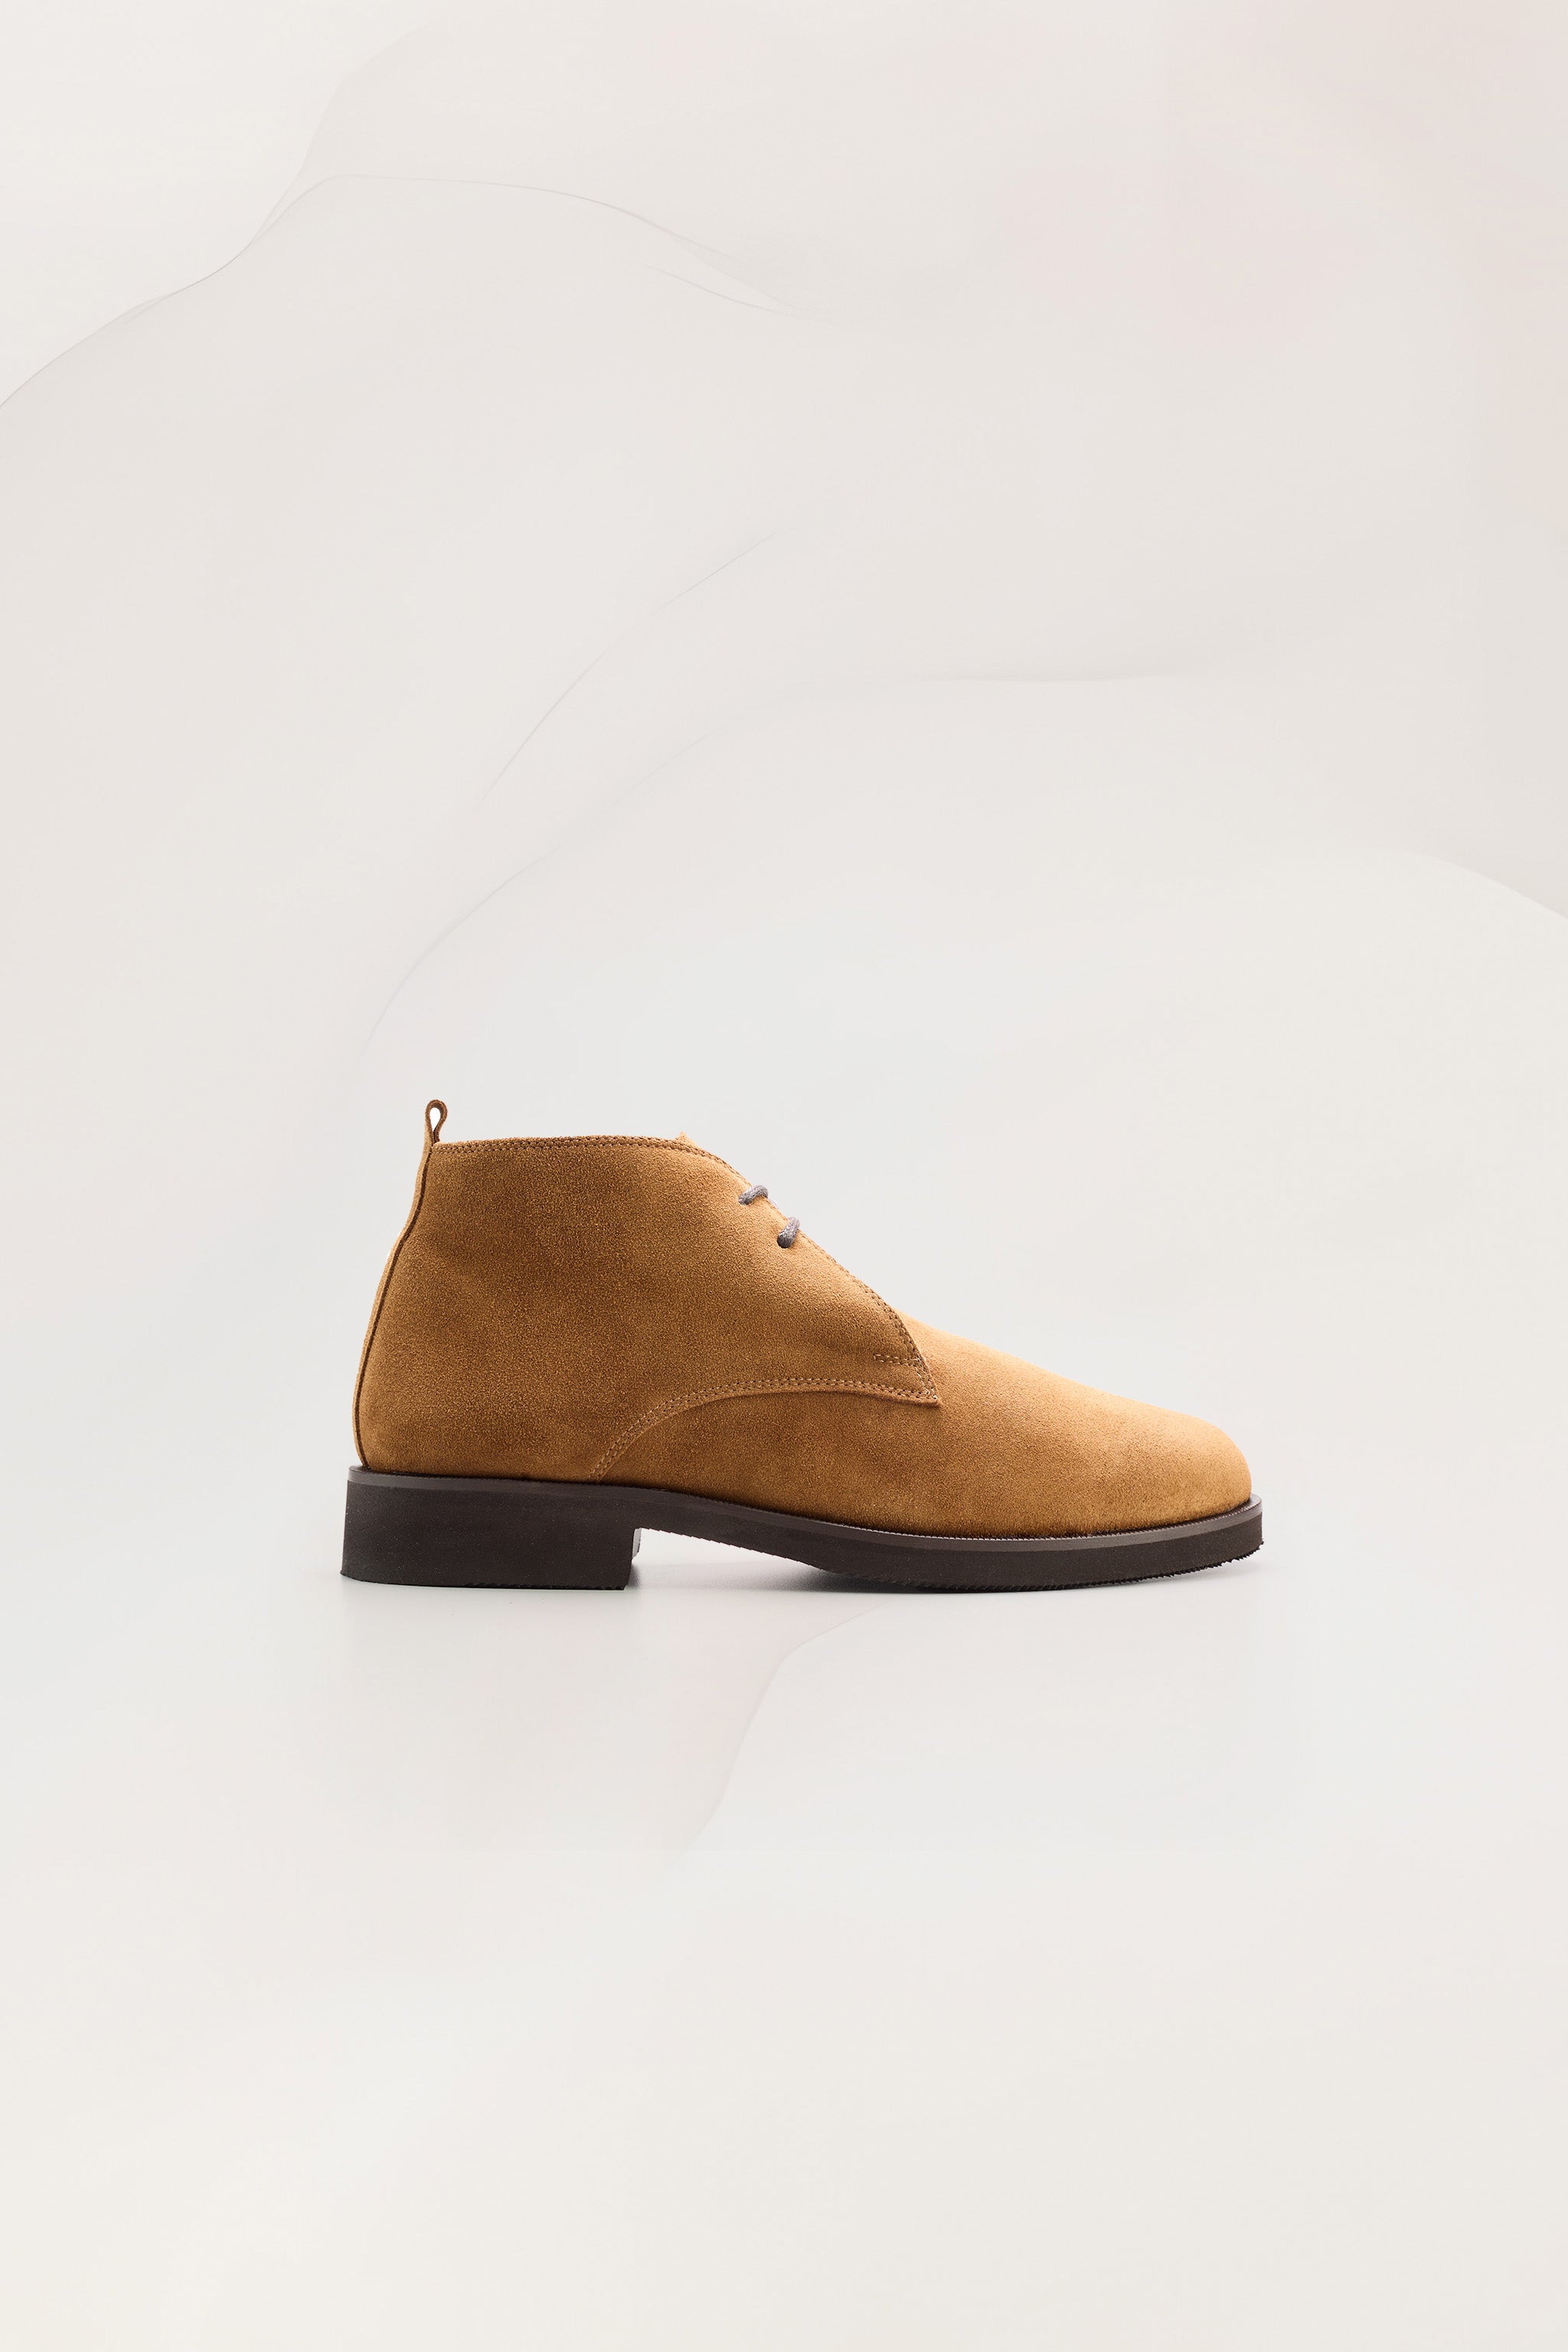 Mens Desert Boots with Shearling Lining in Sigaro Suede